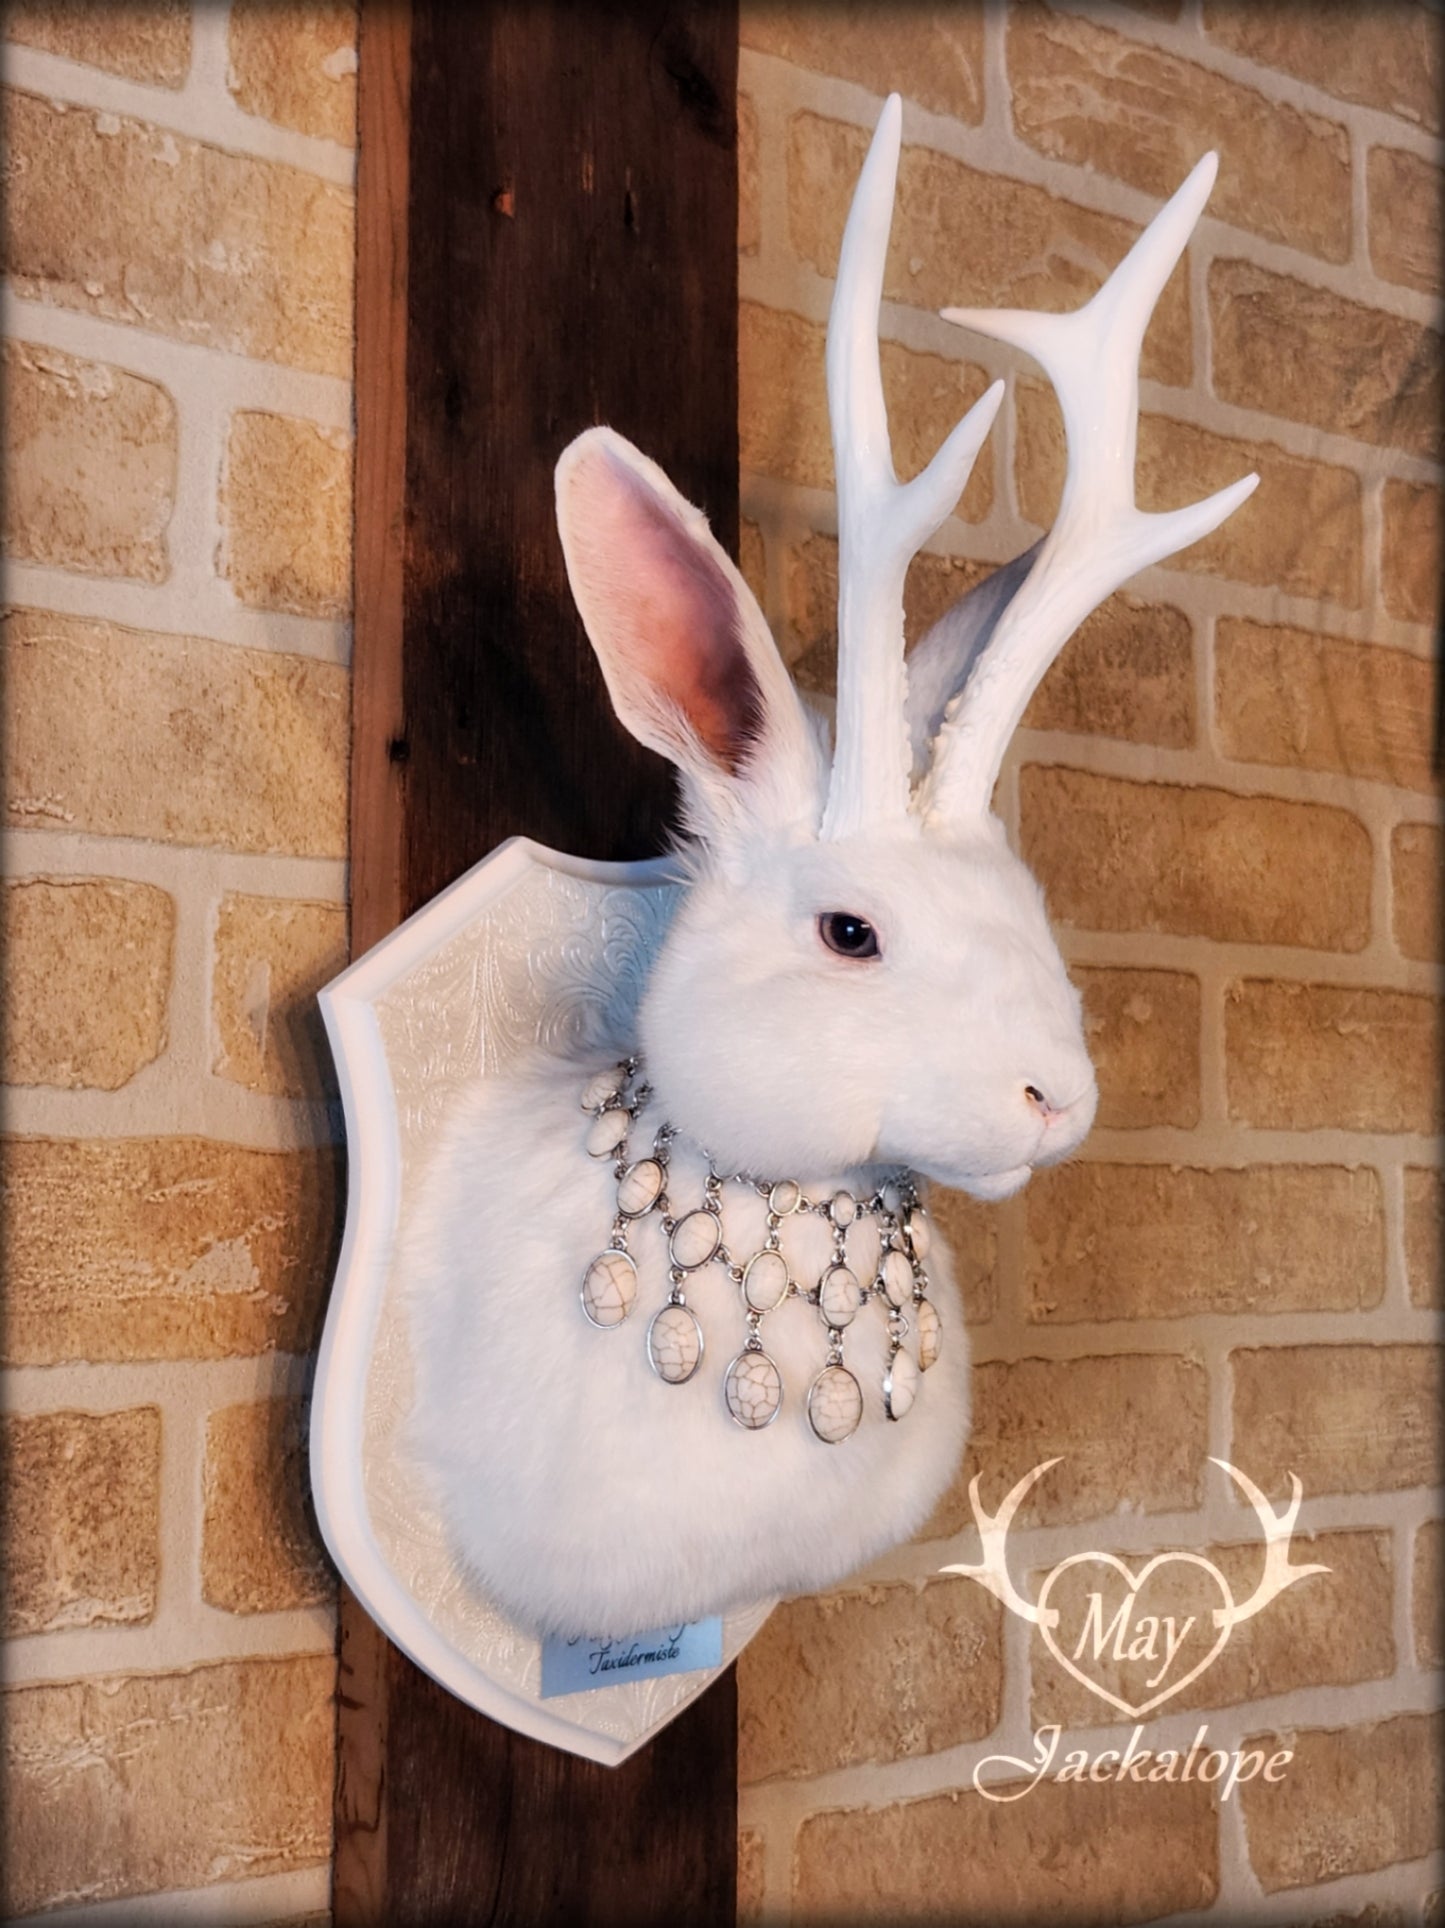 White Jackalope taxidermy with grey eyes, white antlers replica & a necklace